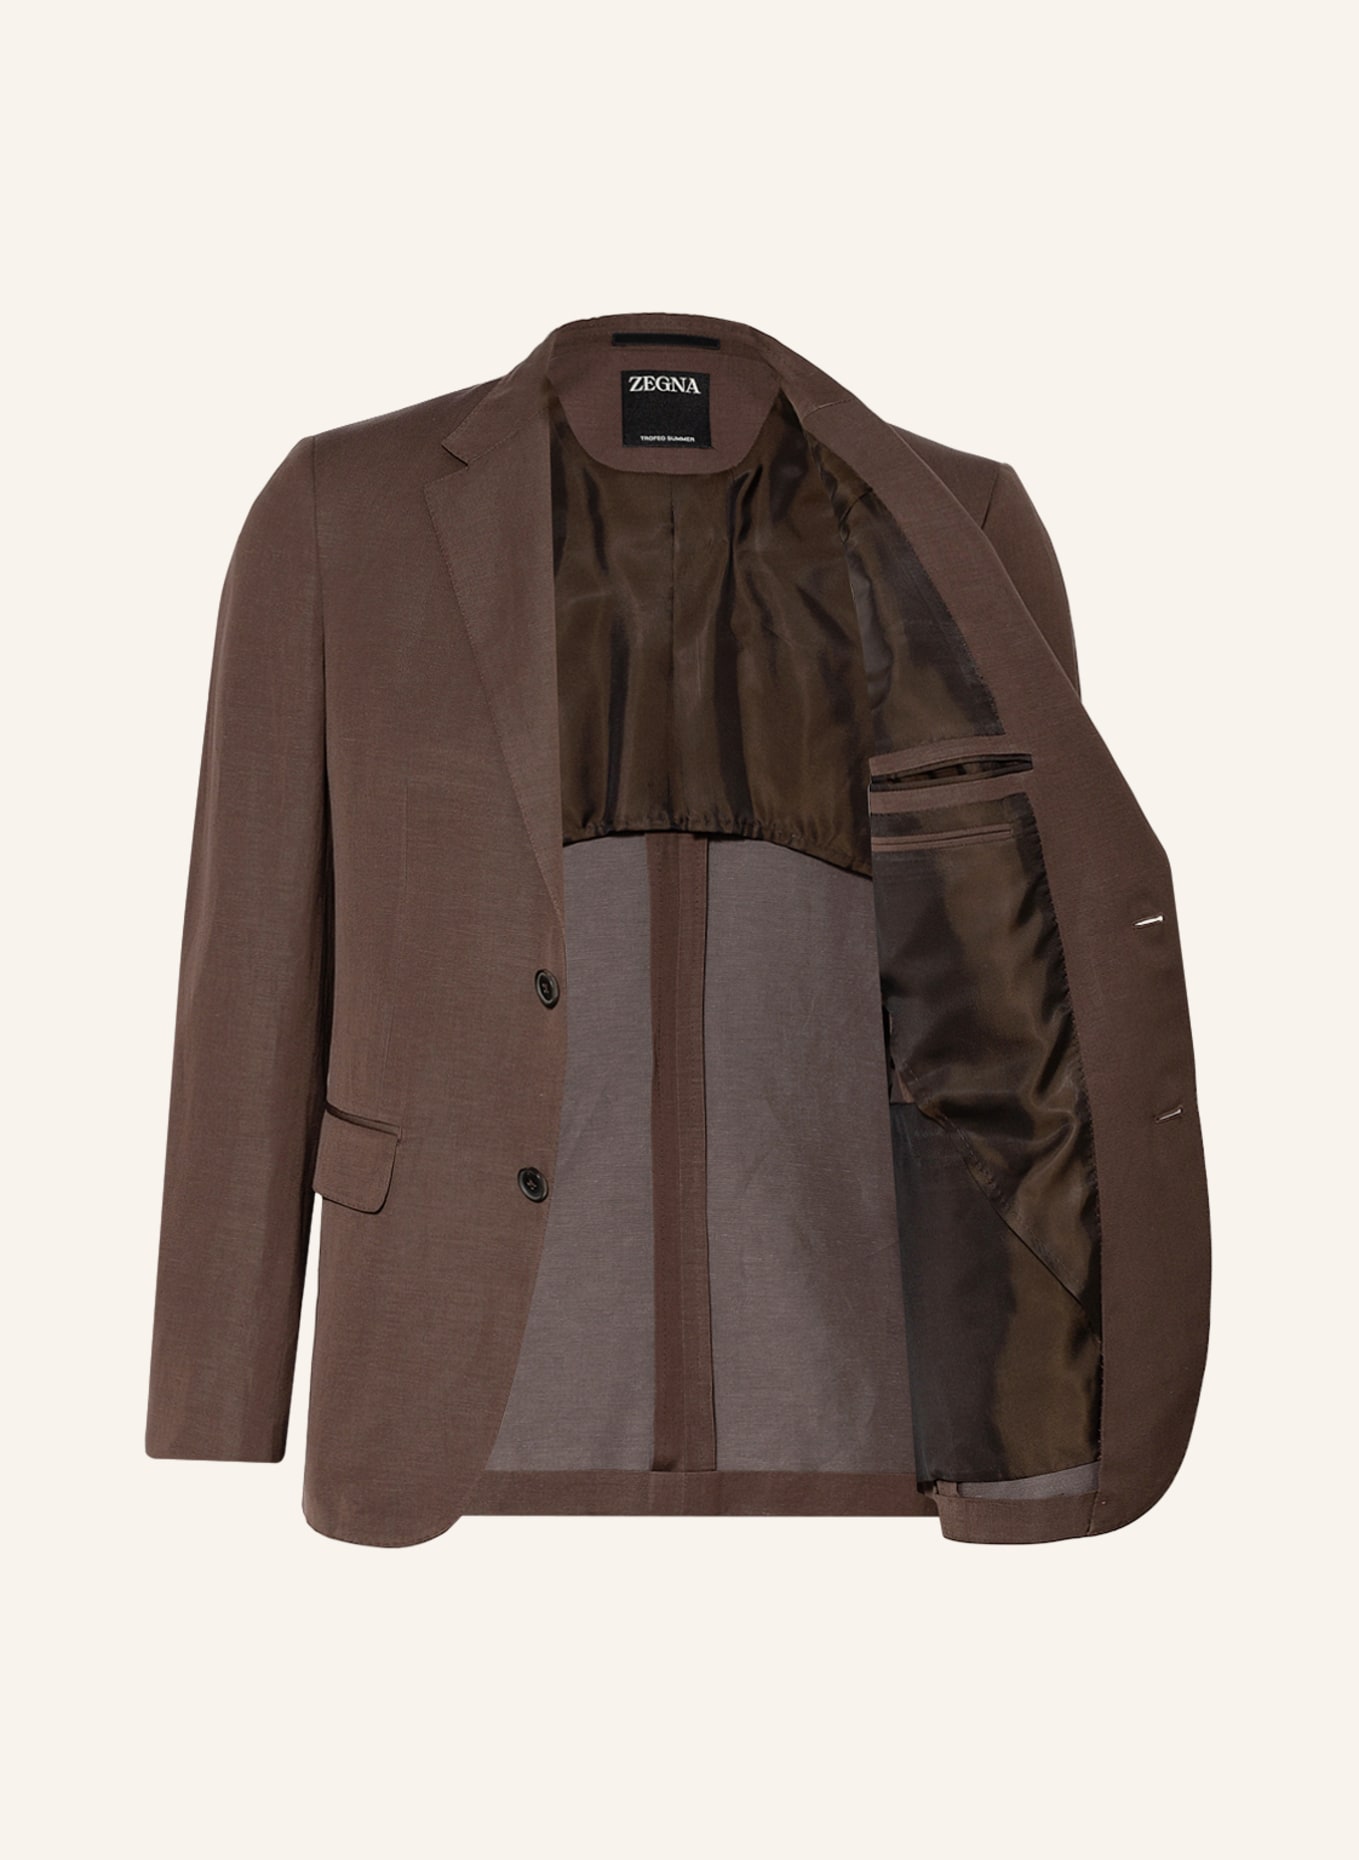 ZEGNA Tailored jacket extra slim fit with linen, Color: DARK BROWN (Image 4)